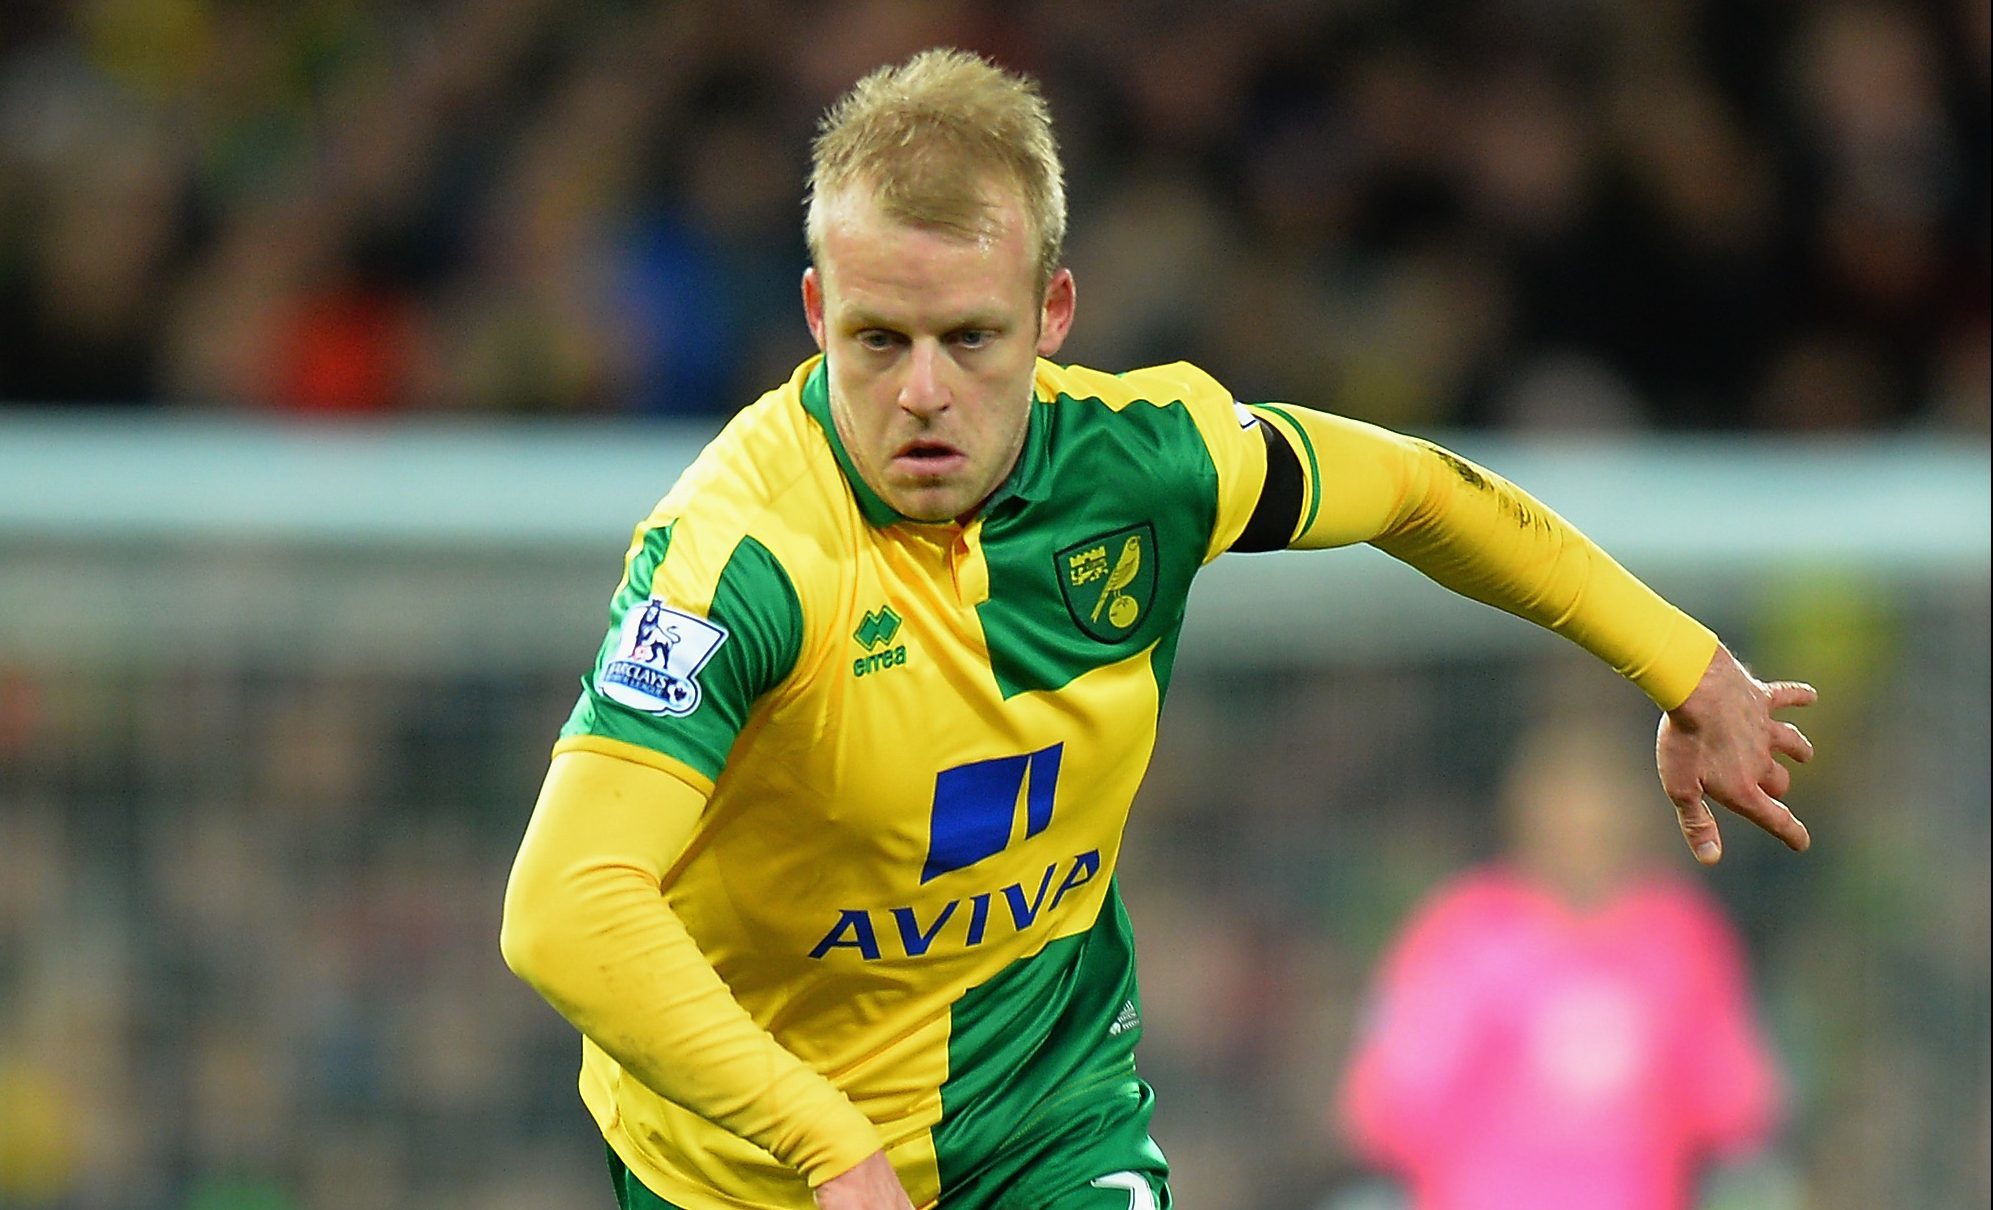 Steven Naismith in action for Norwich City (Tony Marshall/Getty Images)